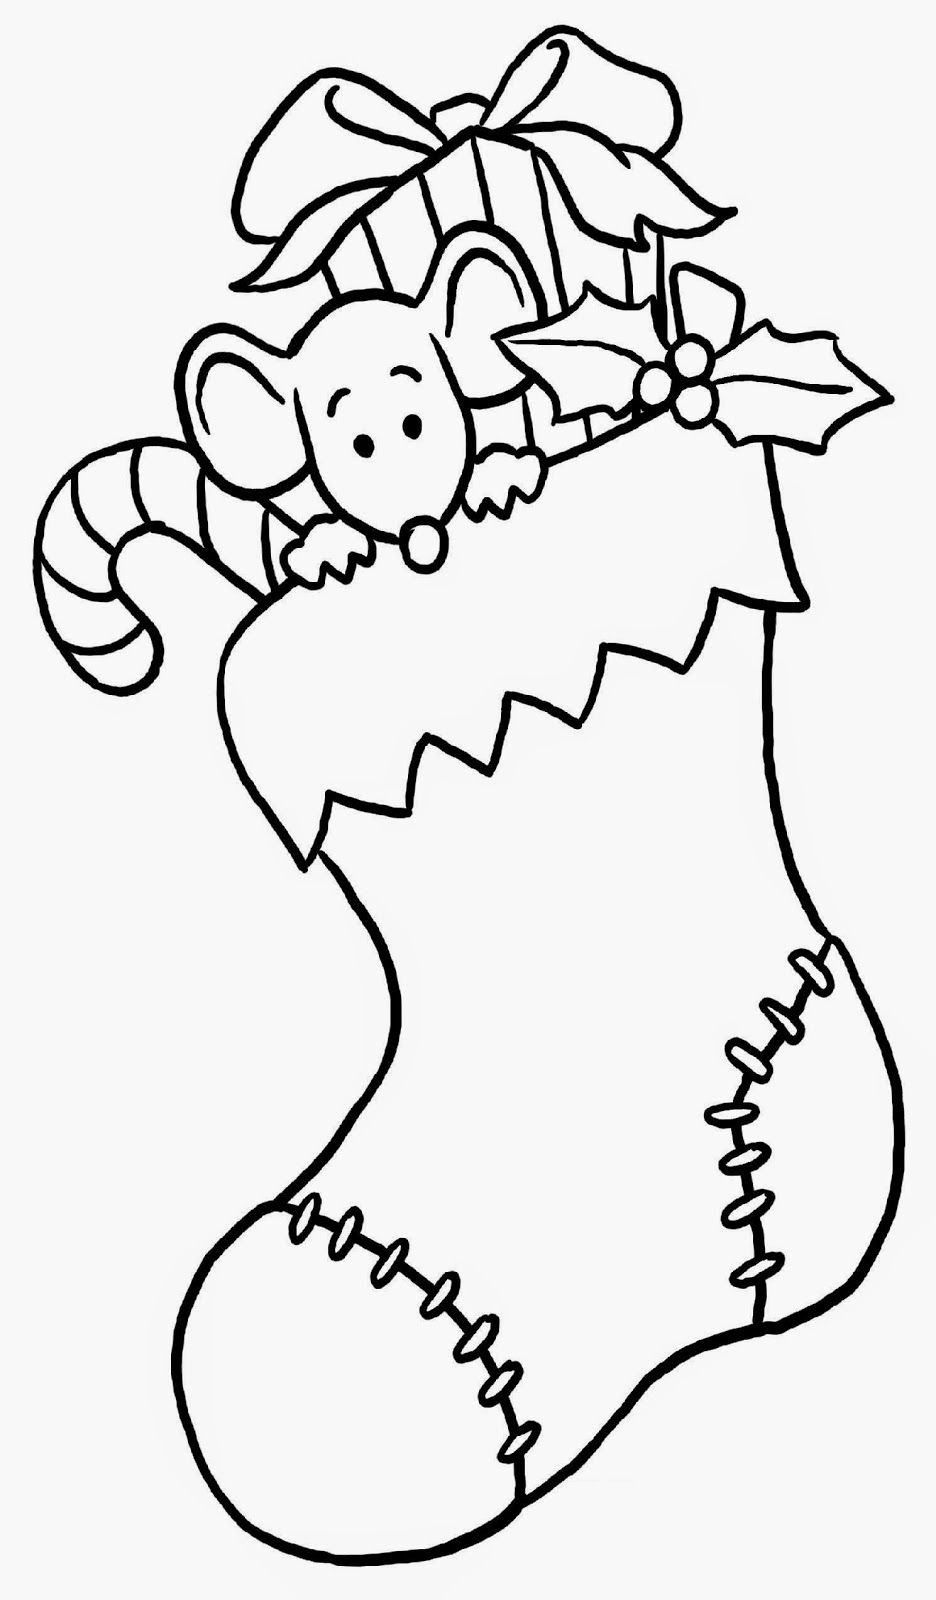 Free Printable Christmas Coloring Pages For Kids | Free Coloring Pages